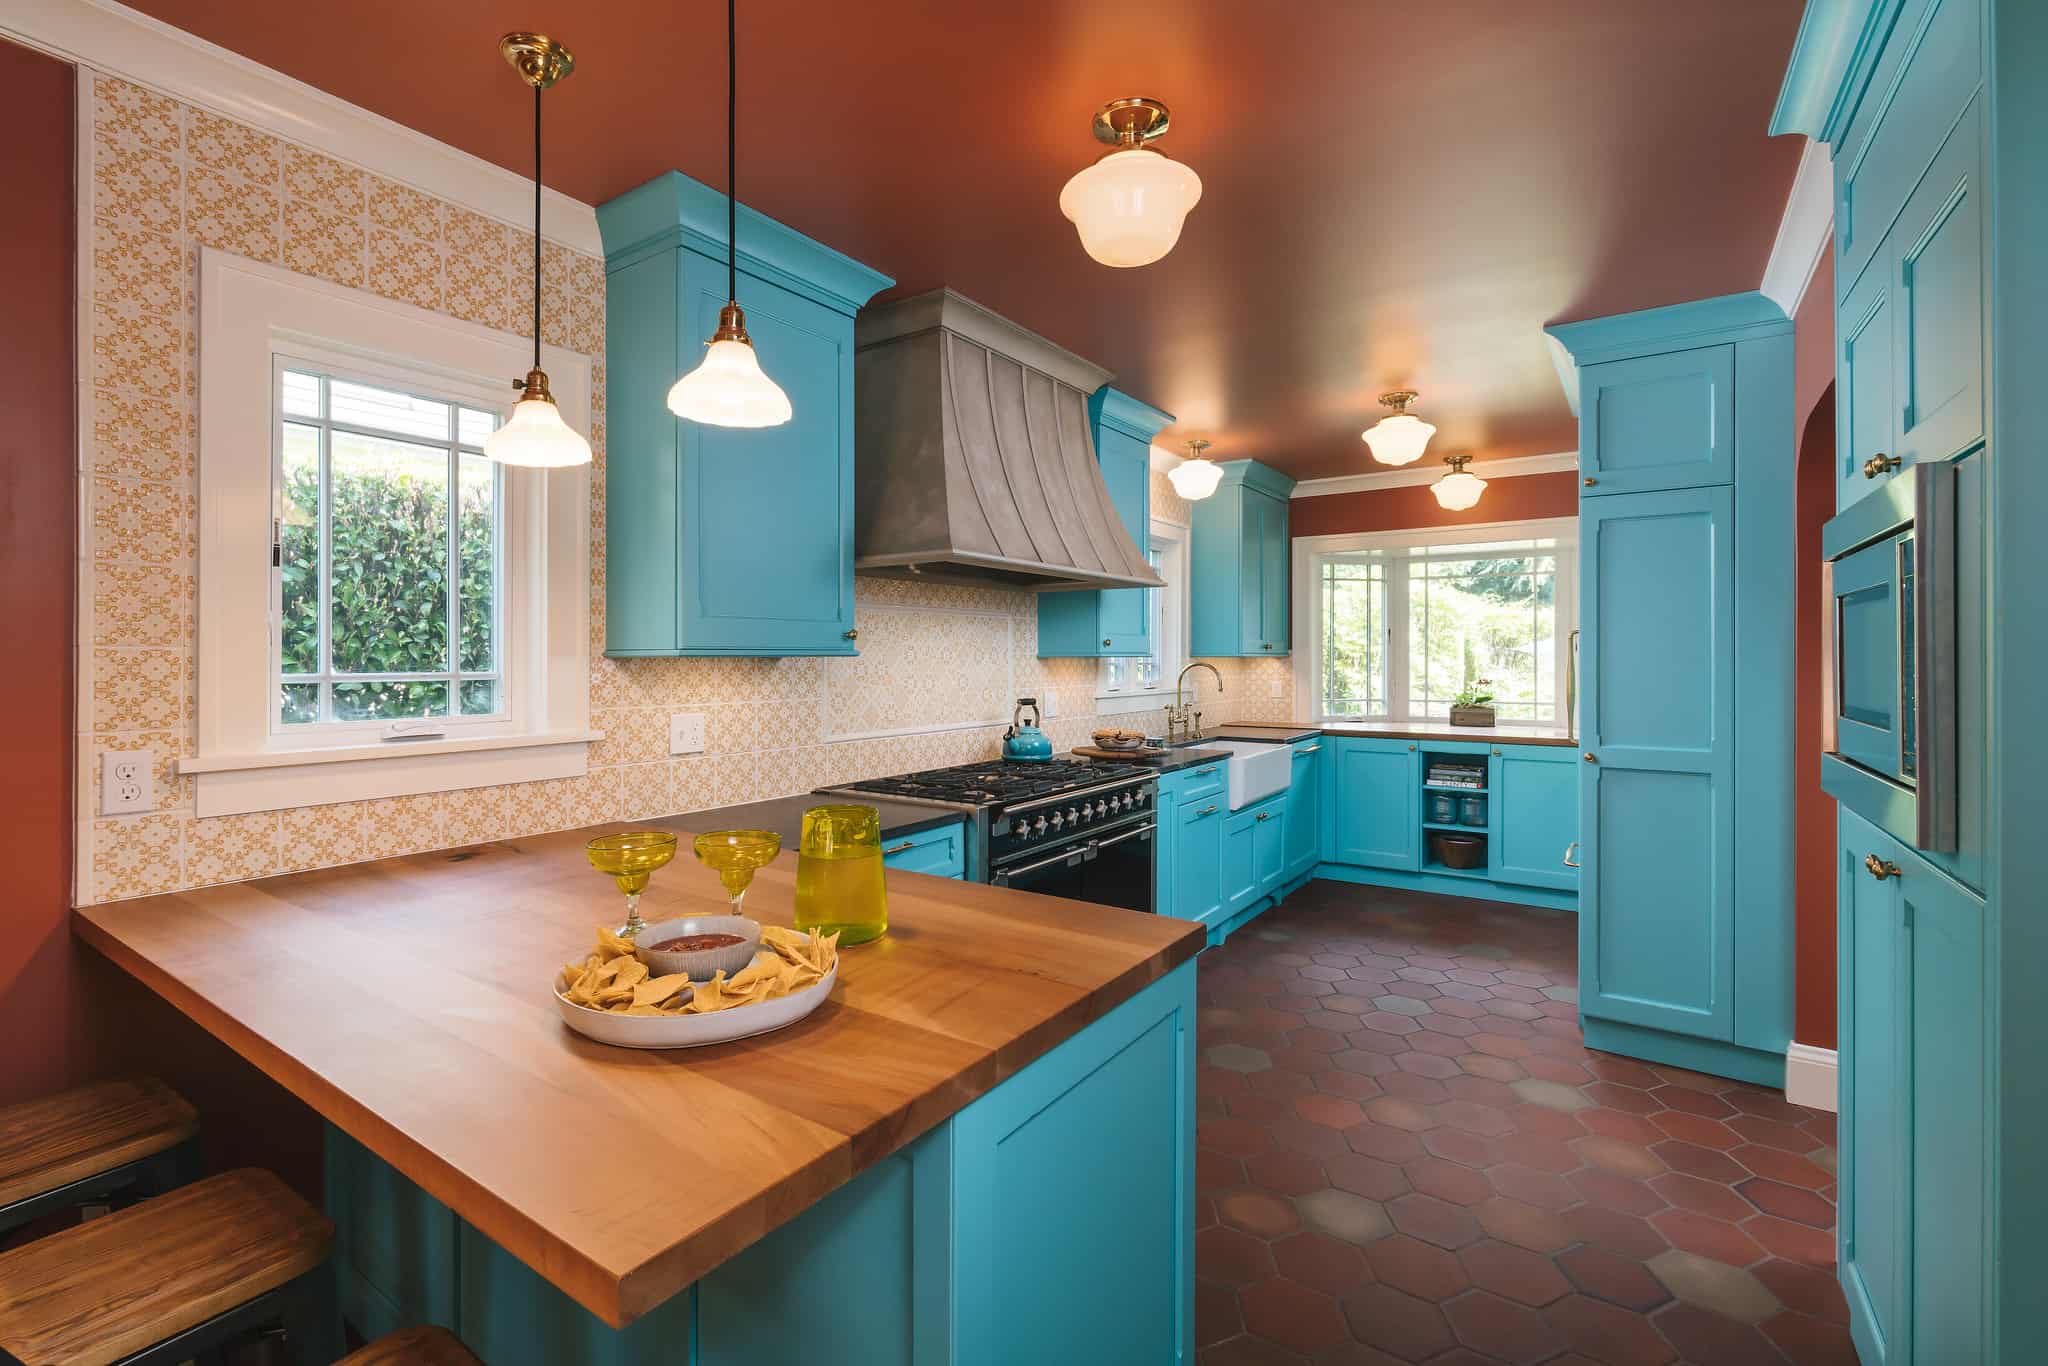 Color, pattern, and lighting create a festive ambiance in this Portland area kitchen